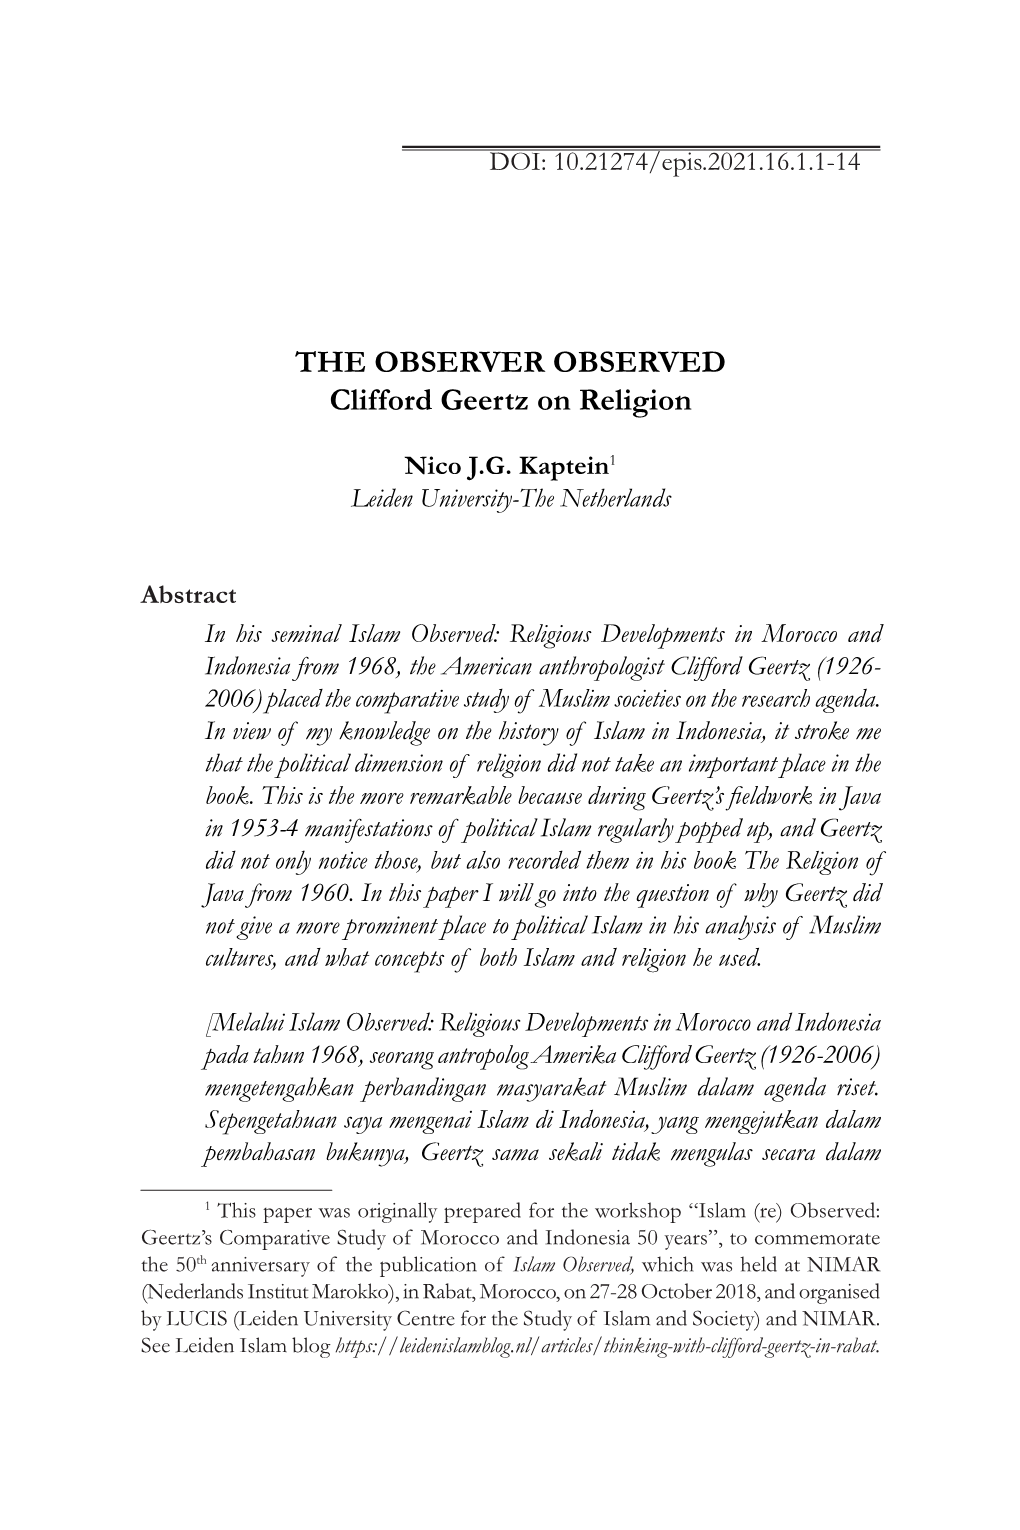 THE OBSERVER OBSERVED Clifford Geertz on Religion